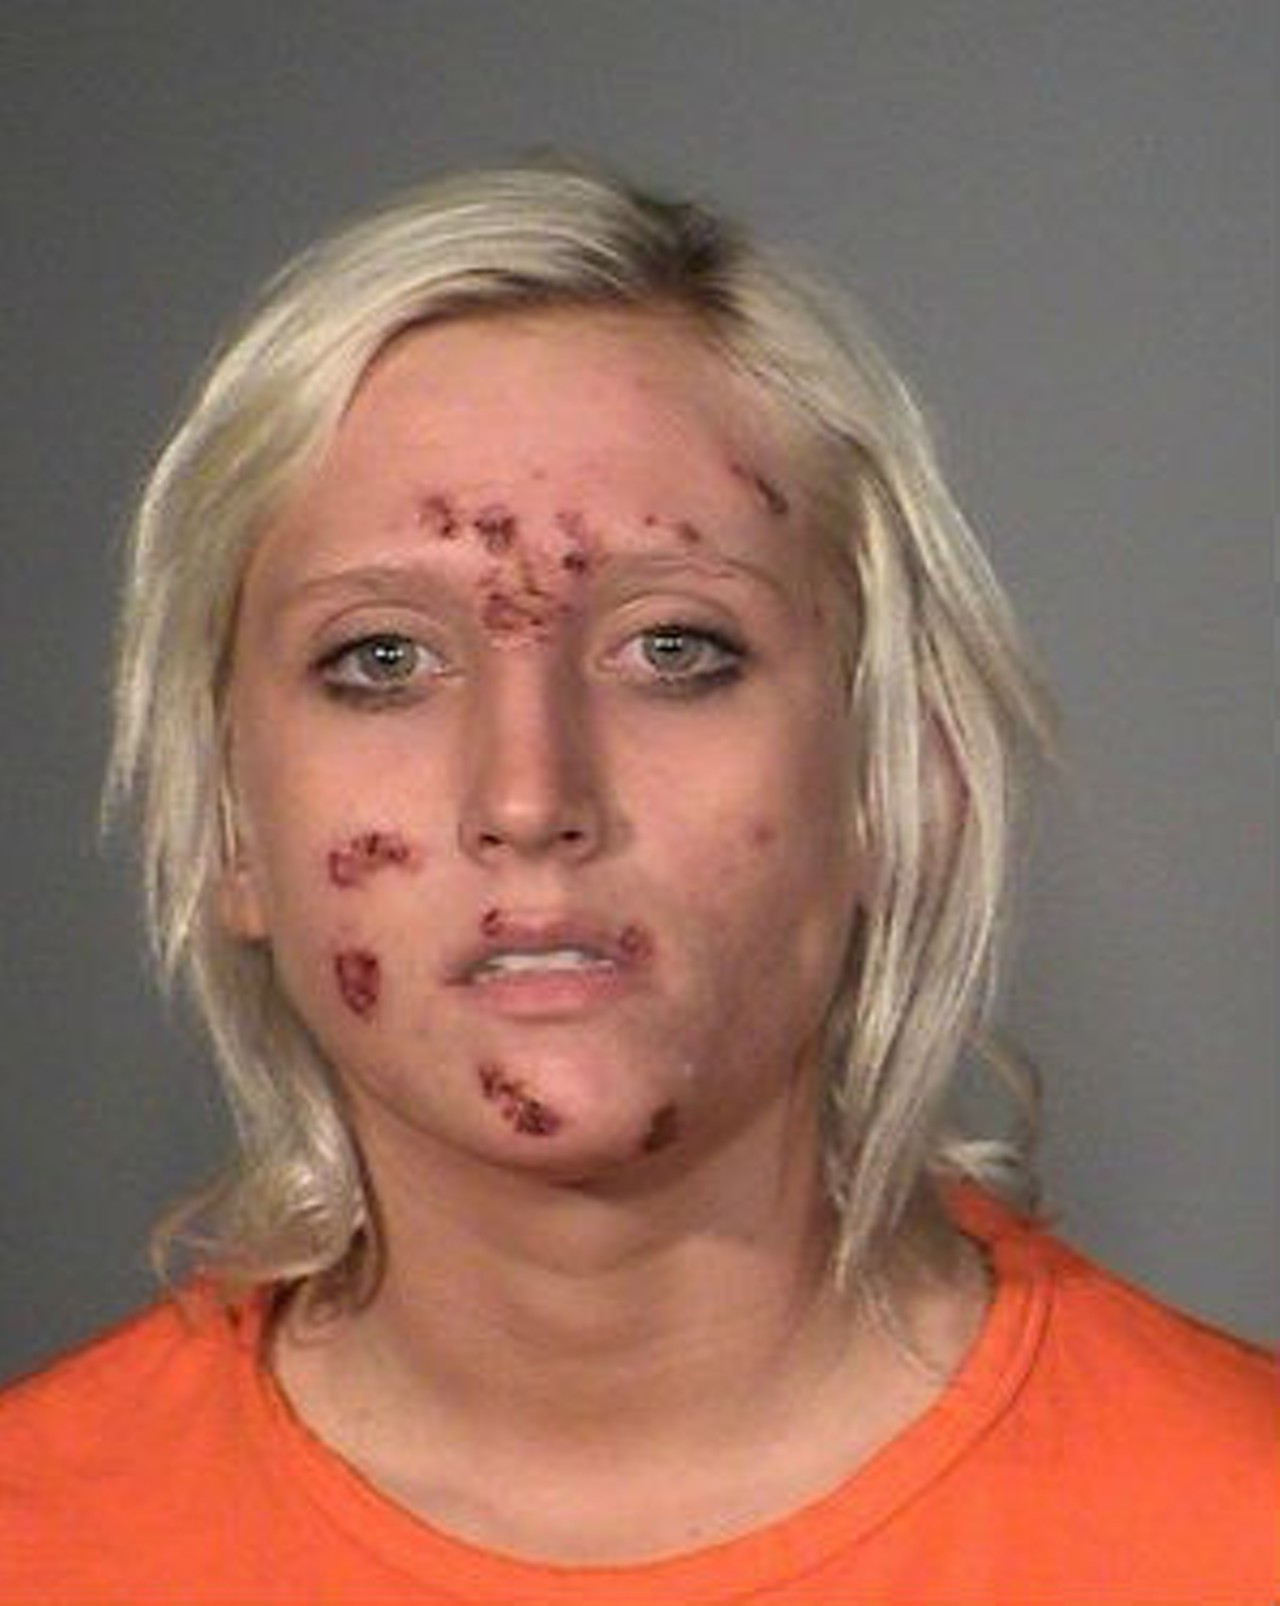 23. Ashley Brooker
When police in Stillwater, Minnesota first encountered her, Ashley Brooker was manically digging through her car in a hospital parking lot, searching for her boyfriend's severed finger. Her face exhibited multiple scars, as if she'd been gnawed on by a famished wolverine who'd just finished a very taxing no-carb diet.
Upon questioning, Brooker remembered that the finger wasn't missing after all; she'd just delivered her boyfriend to the hospital for a minor injury. Nor had she been assaulted by a dieting wolverine. Her facial wounds had magically arrived during a six-day meth bender. But her conspicuous parking lot search did lead the cops to bust her boyfriend for possession.